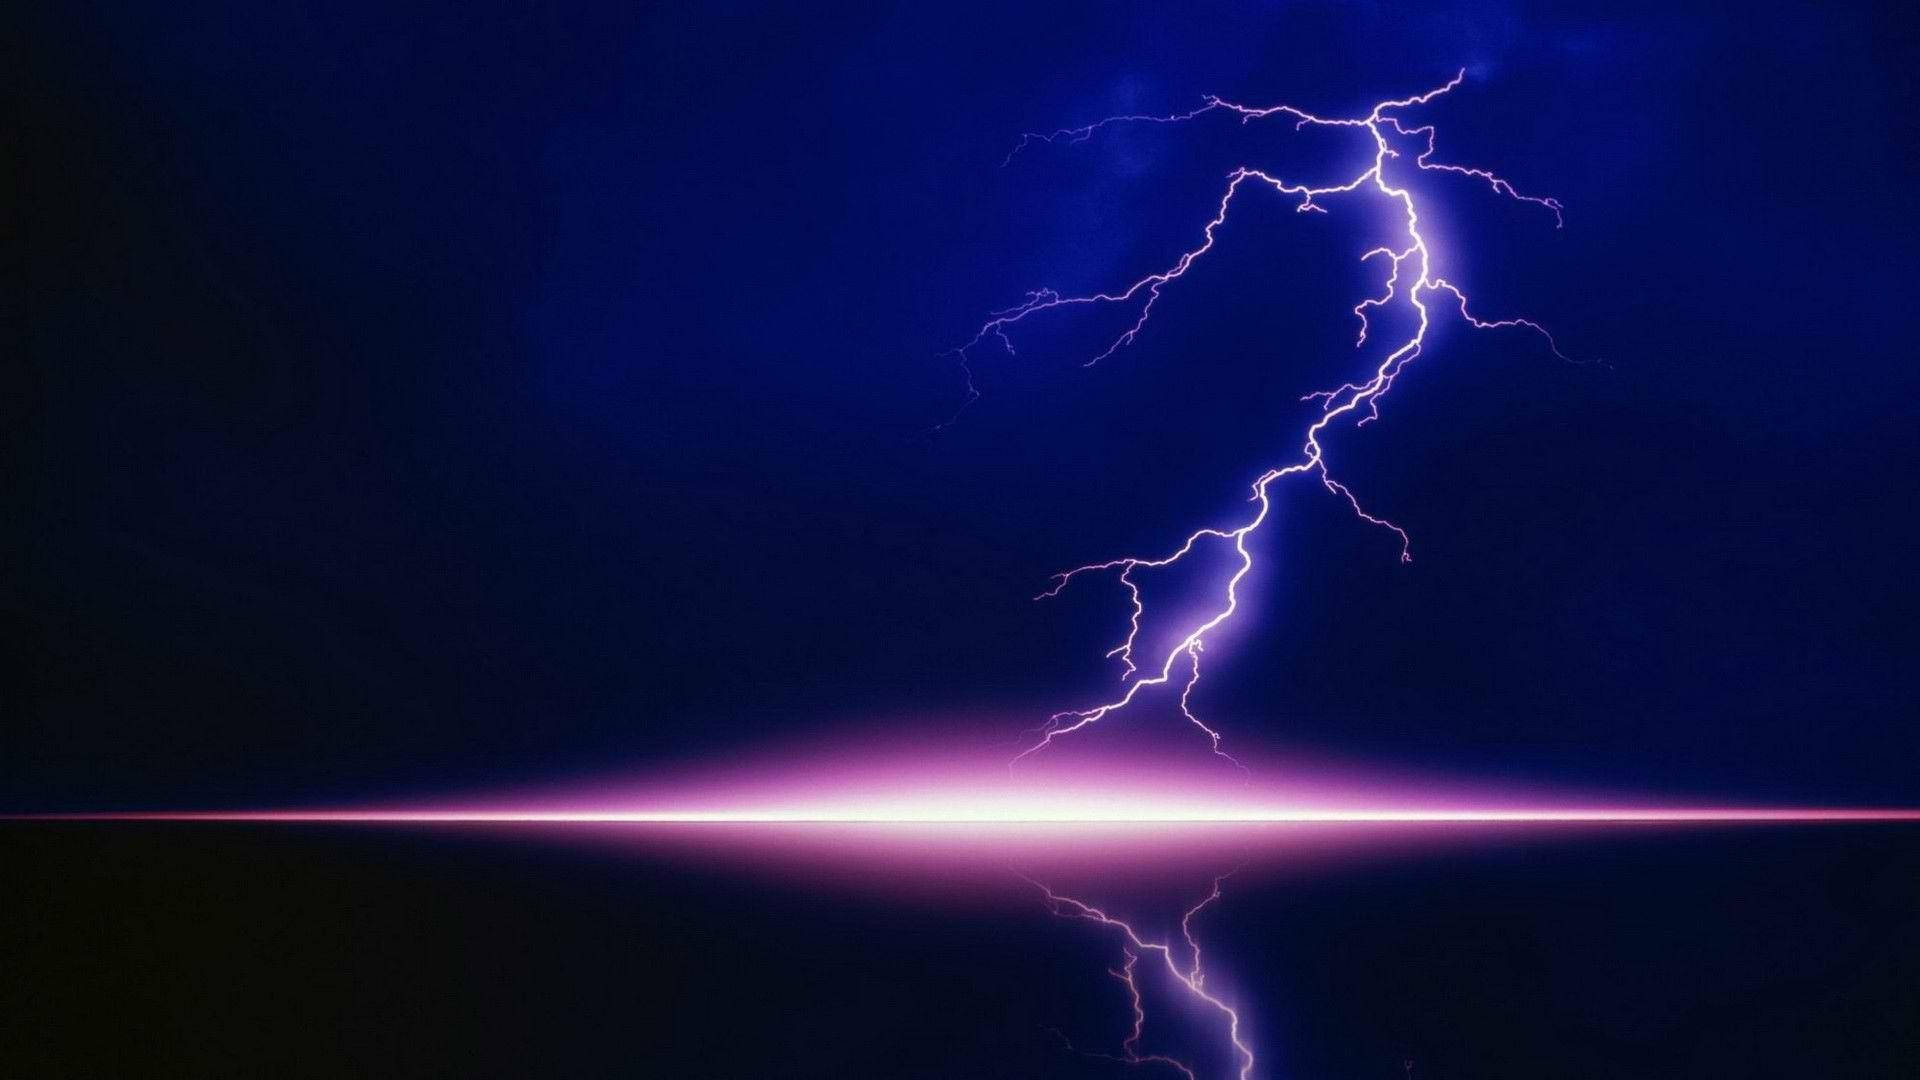 Brighten Up Your Low Spirits With This Aesthetic Lightning Wallpaper